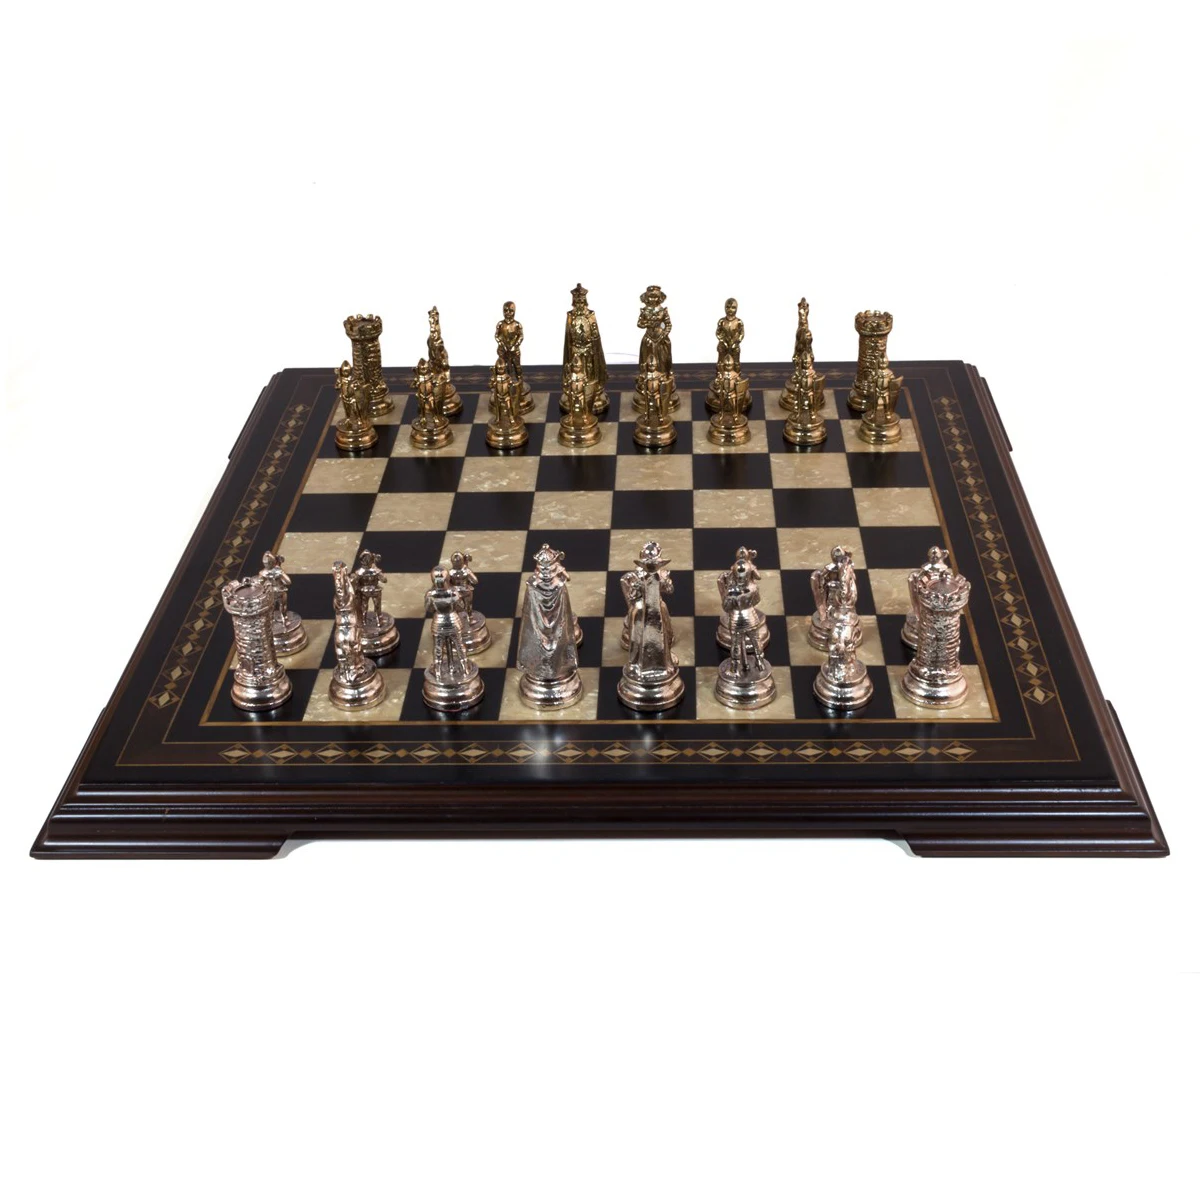 22.5'' Flat Footed Black Chessboard - Solid Beech Wood Mosaic Engraved Chess Board Game Gift Items Deck Box Checkers Шахматы жизнь и шахматы карпов а е